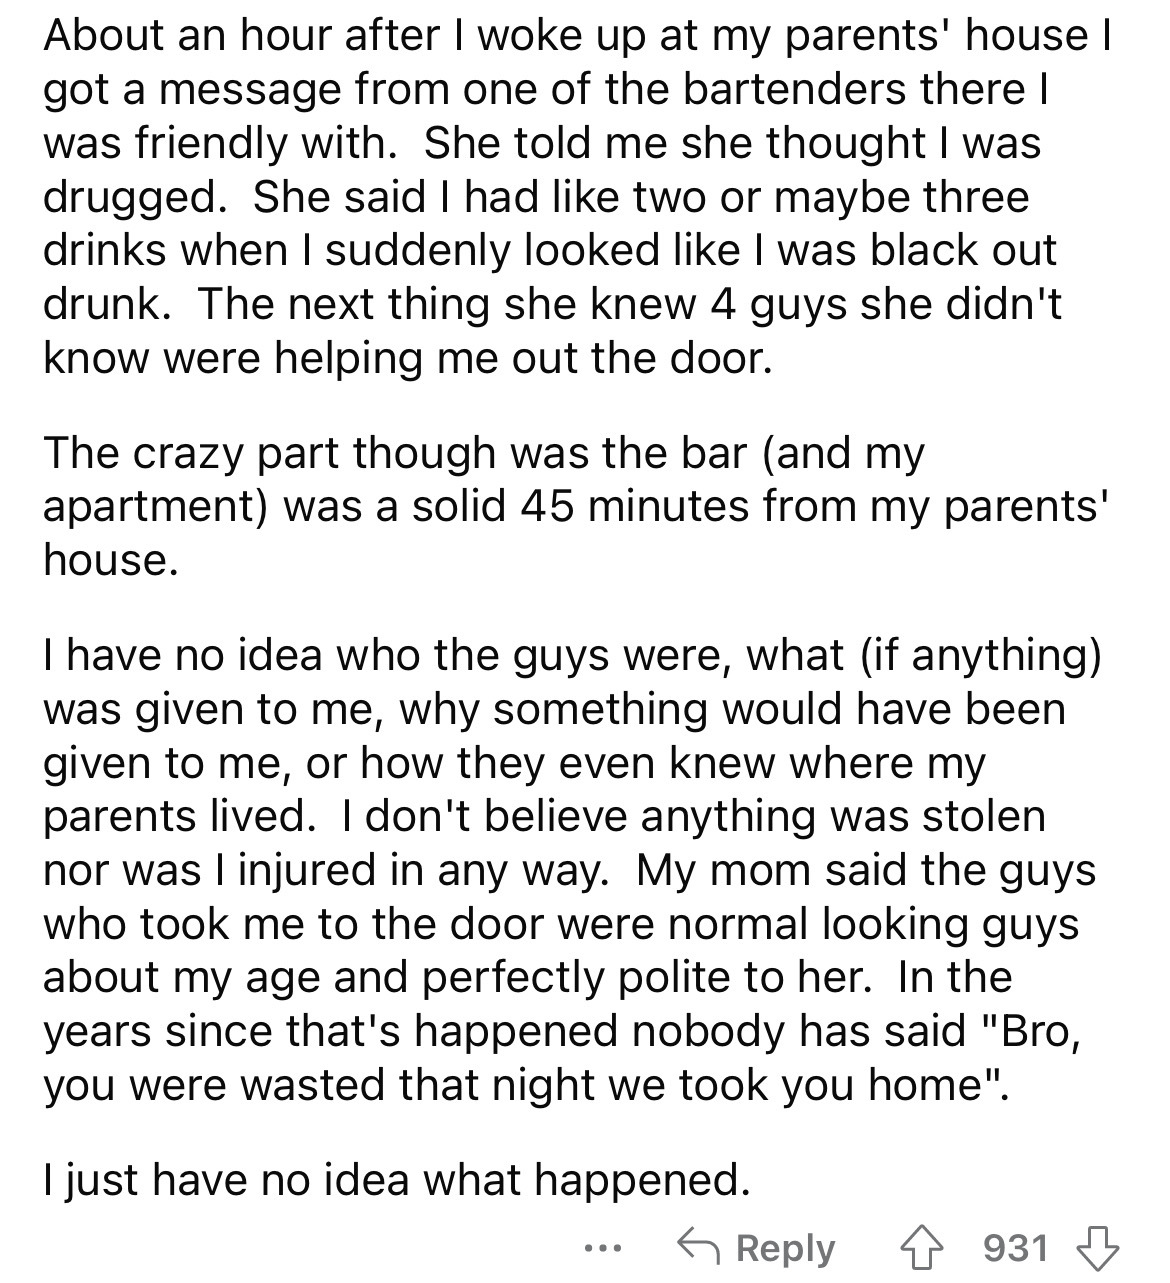 document - About an hour after I woke up at my parents' house I got a message from one of the bartenders there I was friendly with. She told me she thought I was drugged. She said I had two or maybe three drinks when I suddenly looked I was black out drun